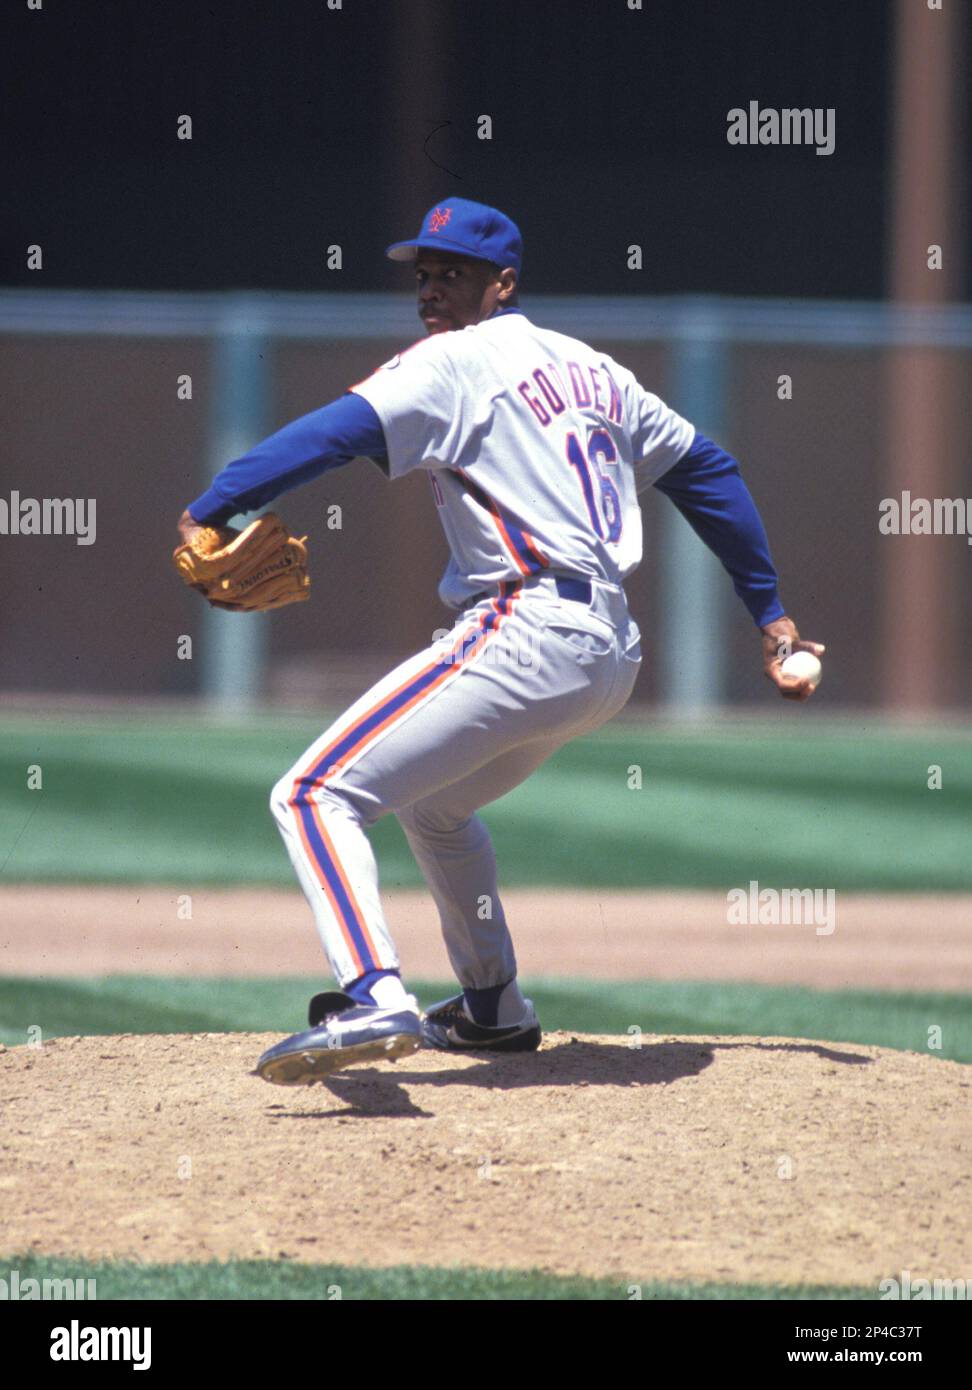 New York Mets Dwight Gooden (16) in action during a game from the 1987  season with the New York Mets at Shea Stadium in Flushing Meadows, New York.  Dwight Gooden played for